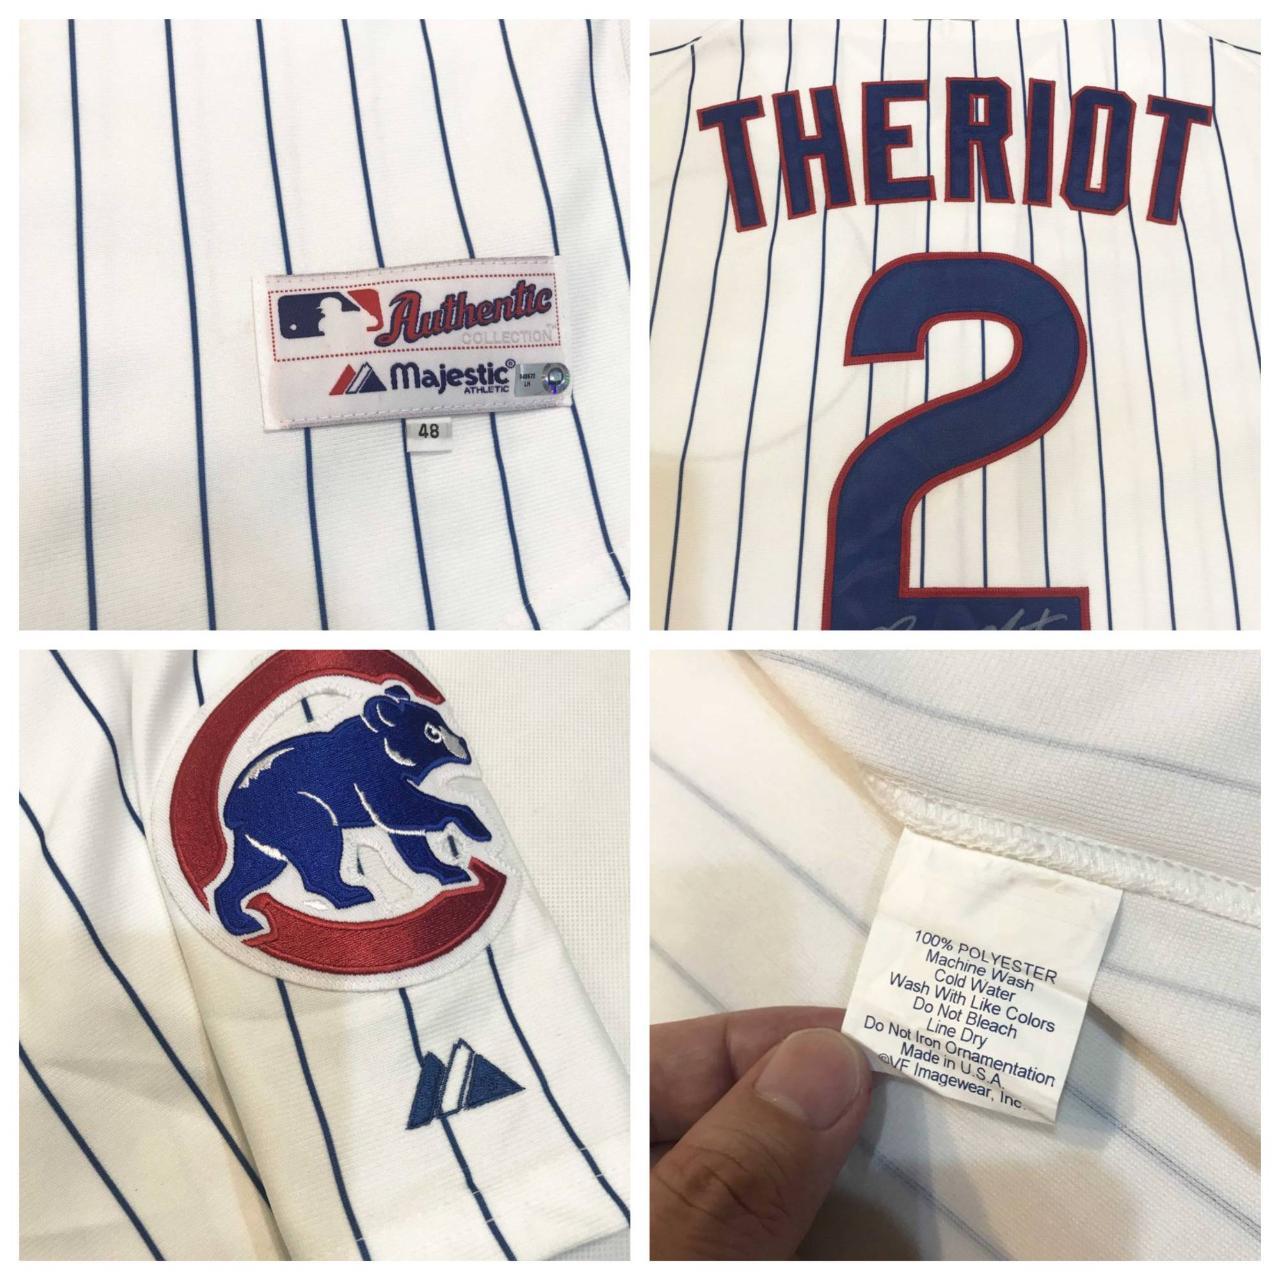 CHICAGO CUBS RYAN THERIOT MAJESTIC AUTHENTIC MLB BASEBALL JERSEY